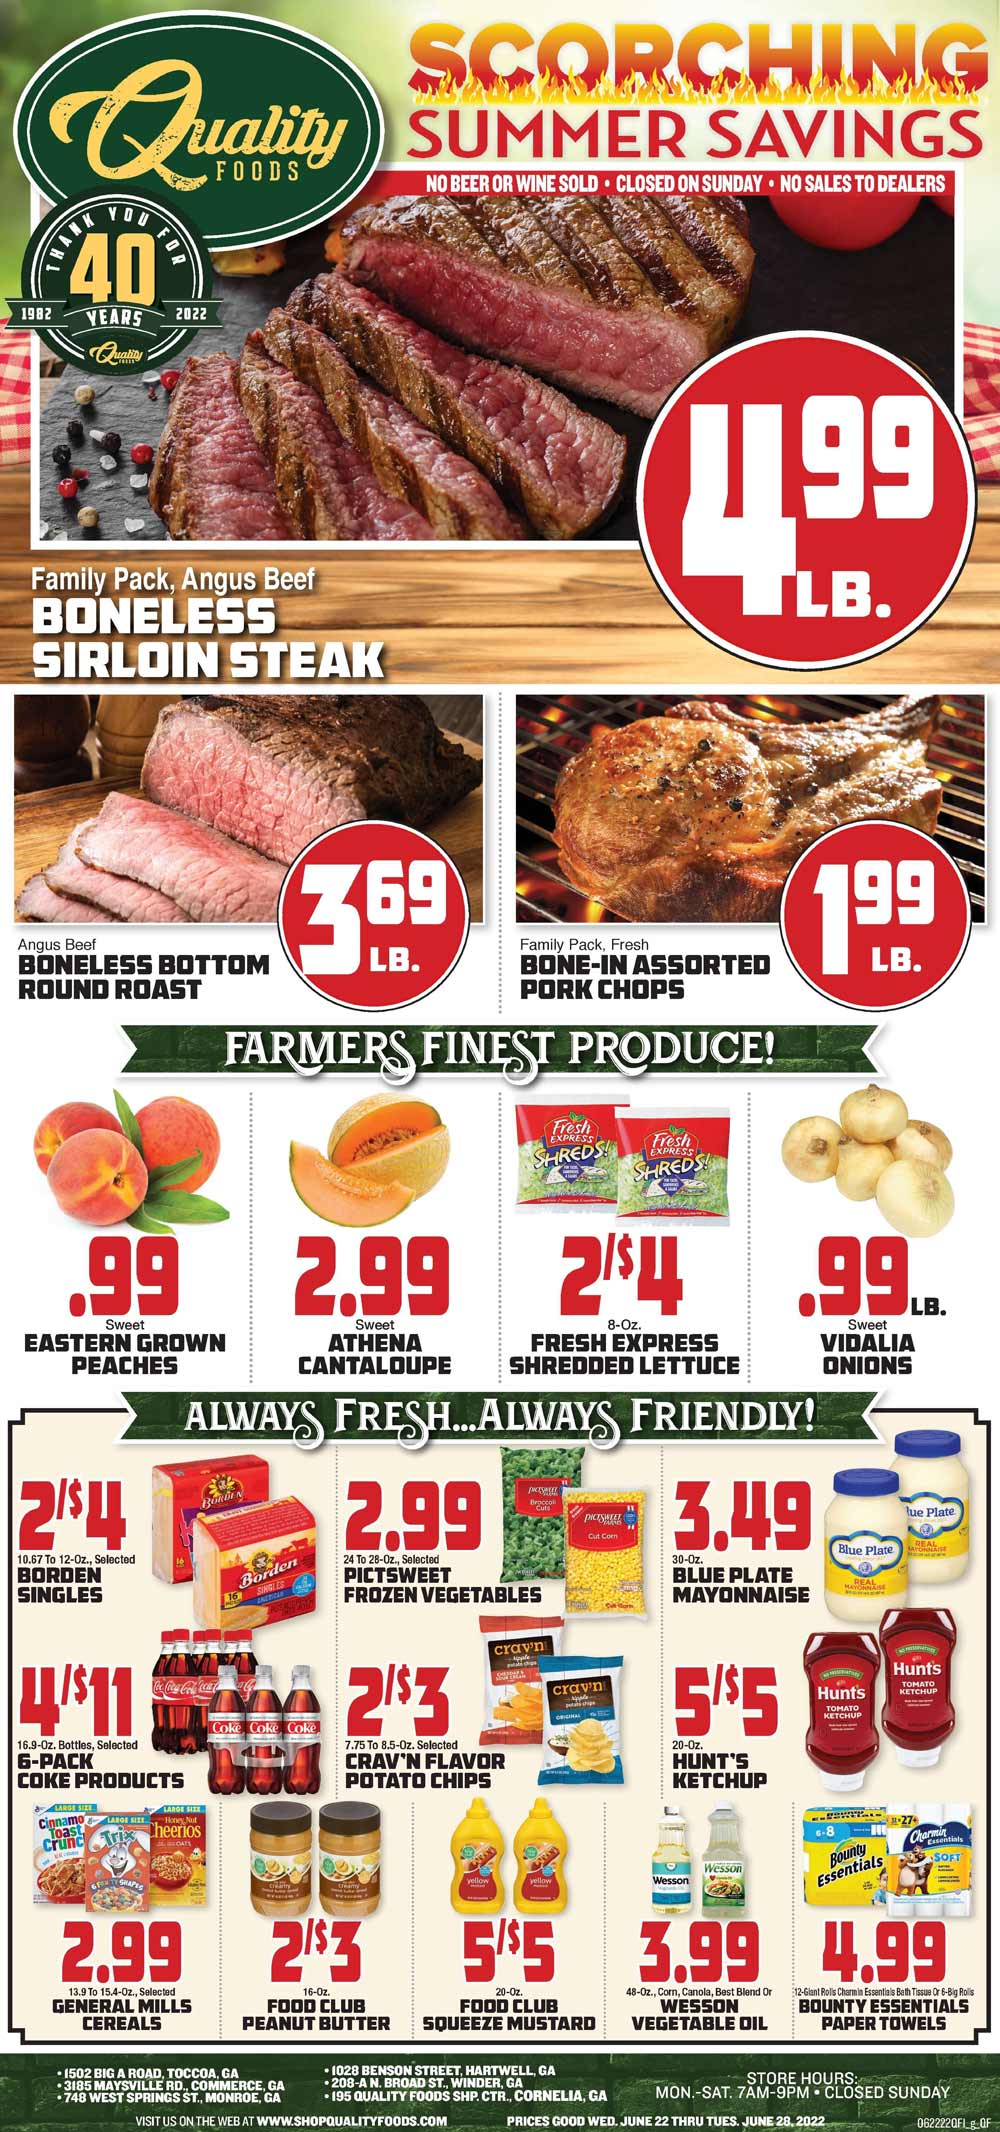 Quality Foods Weekly Ad (6/22/22 - 6/28/22)